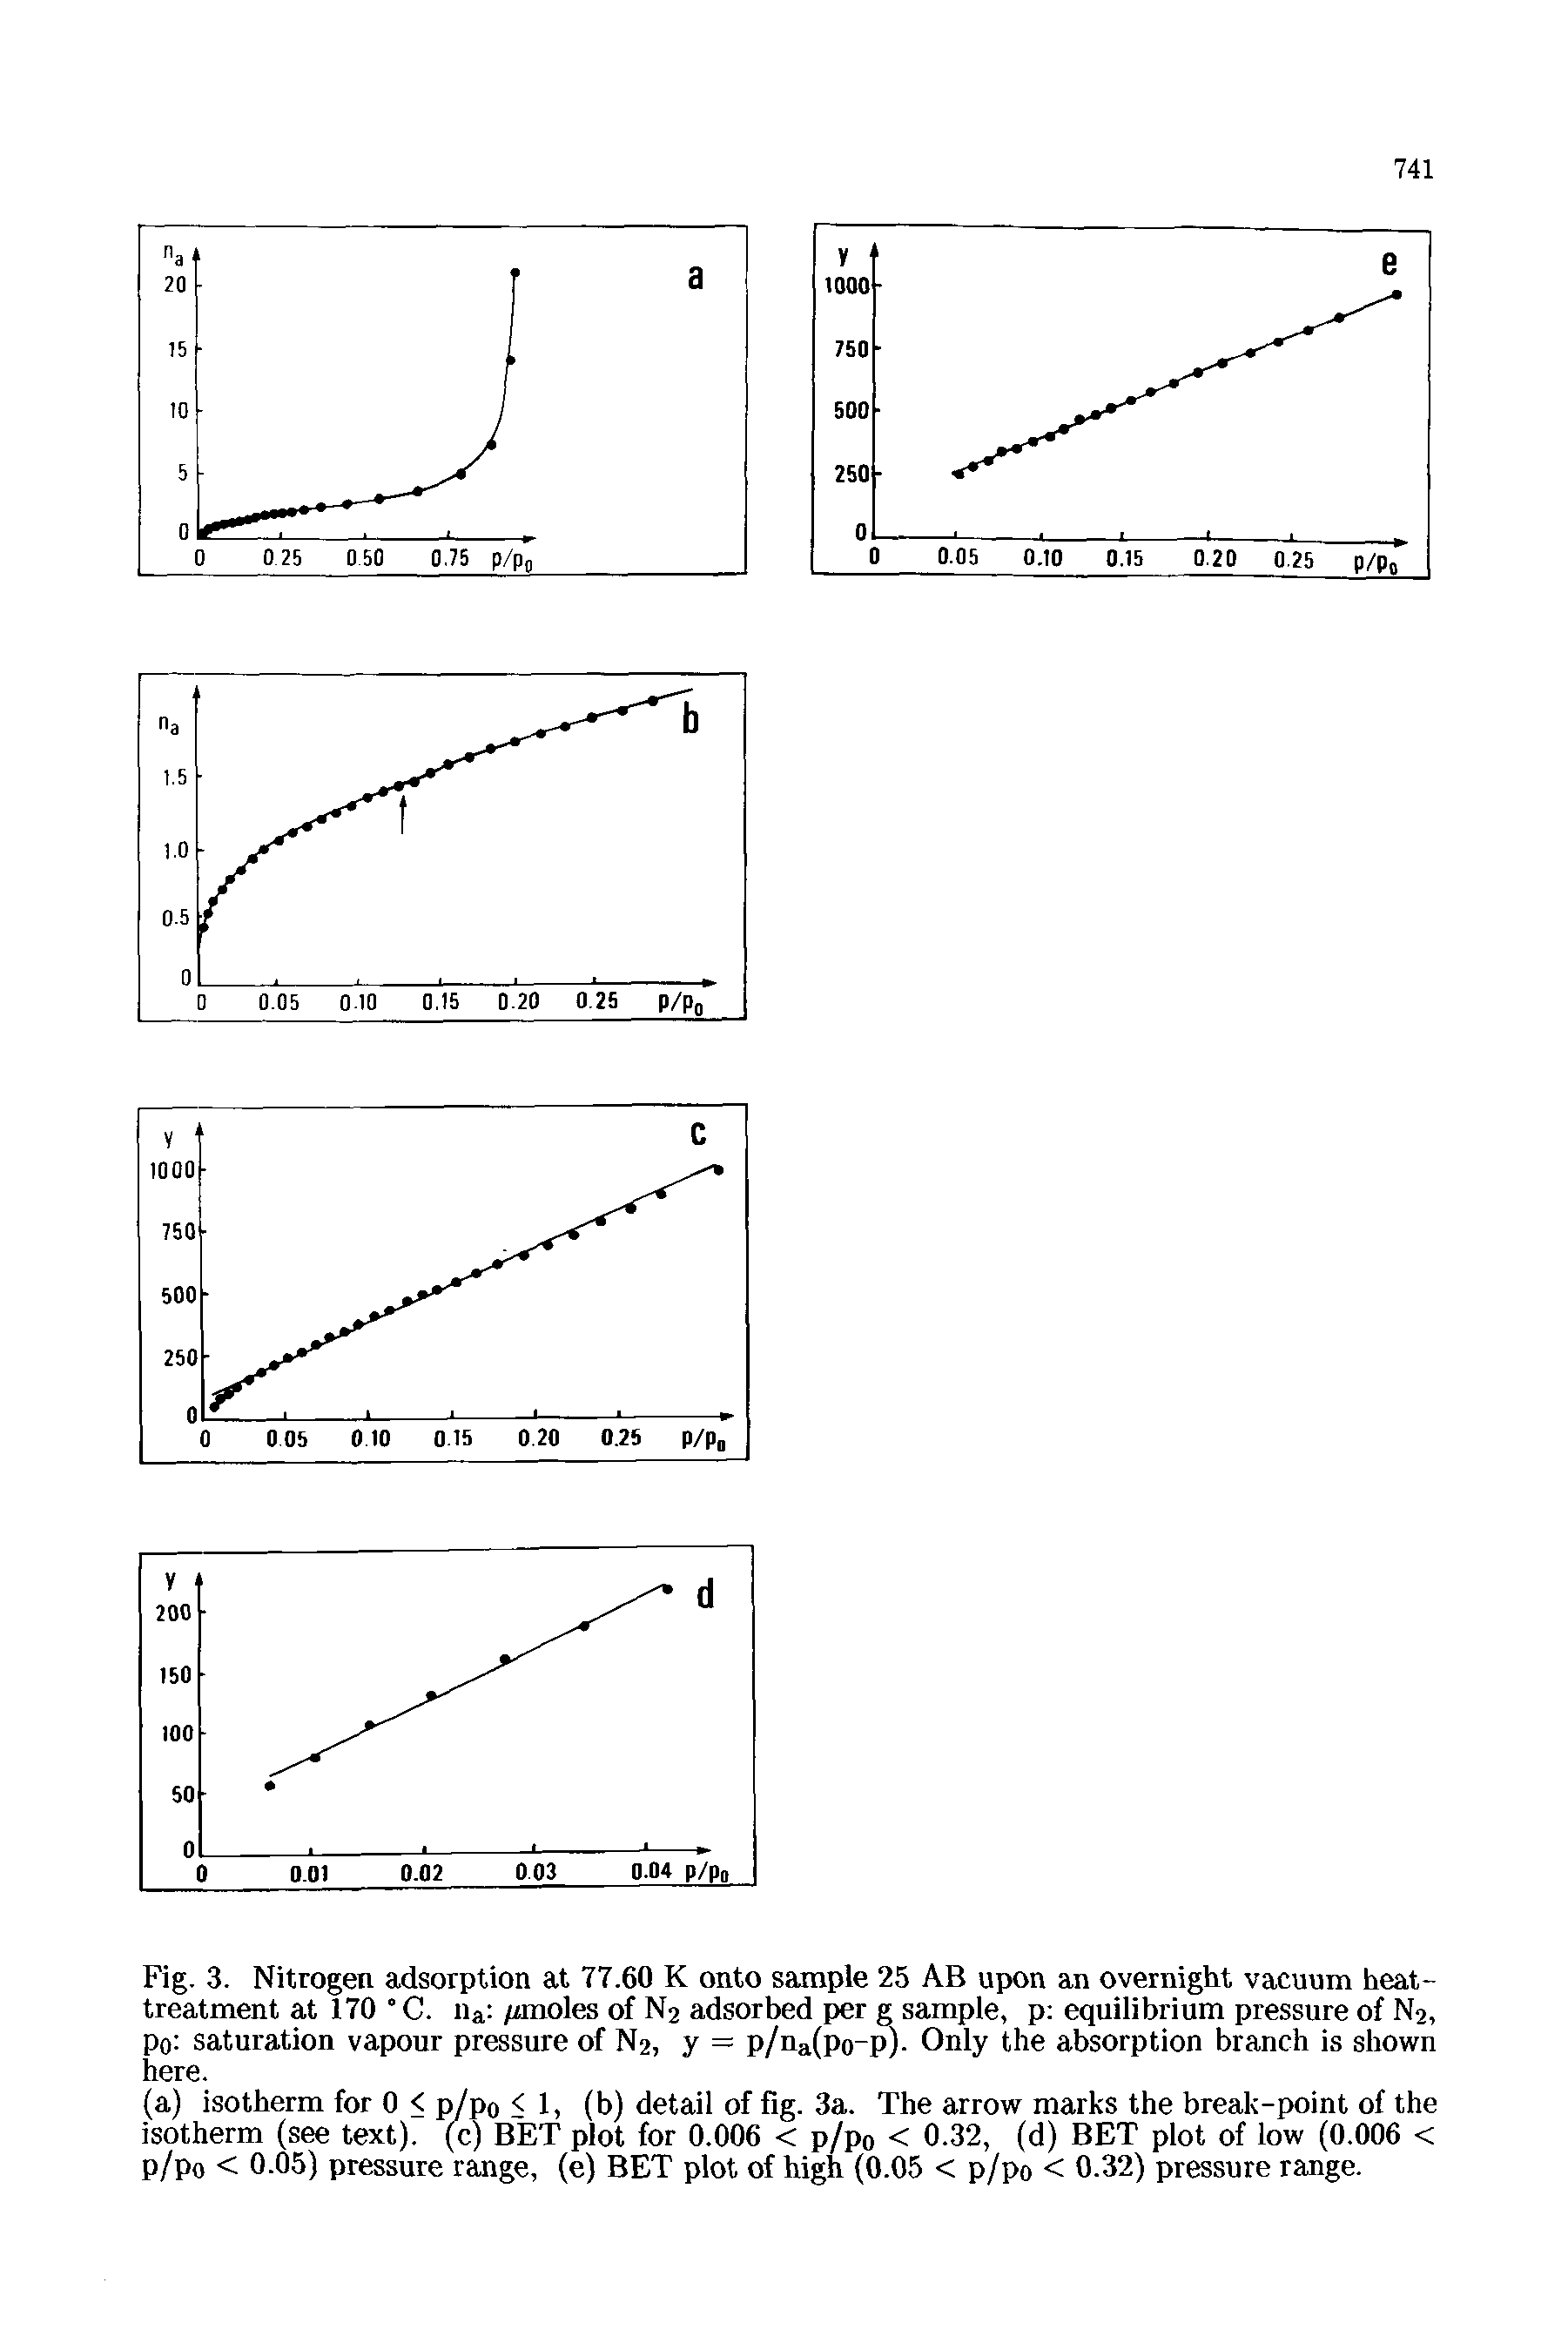 Fig. 3. Nitrogen adsorption at 77.60 K onto sample 25 AB upon an overnight vacuum heat-treatment at 170 C. iia, /rnioles of N2 adsorbed per g sample, p equilibrium pressure of N2, Po saturation vapour pressure of N2, y = p/na(po-p). Only the absorption branch is shown here.